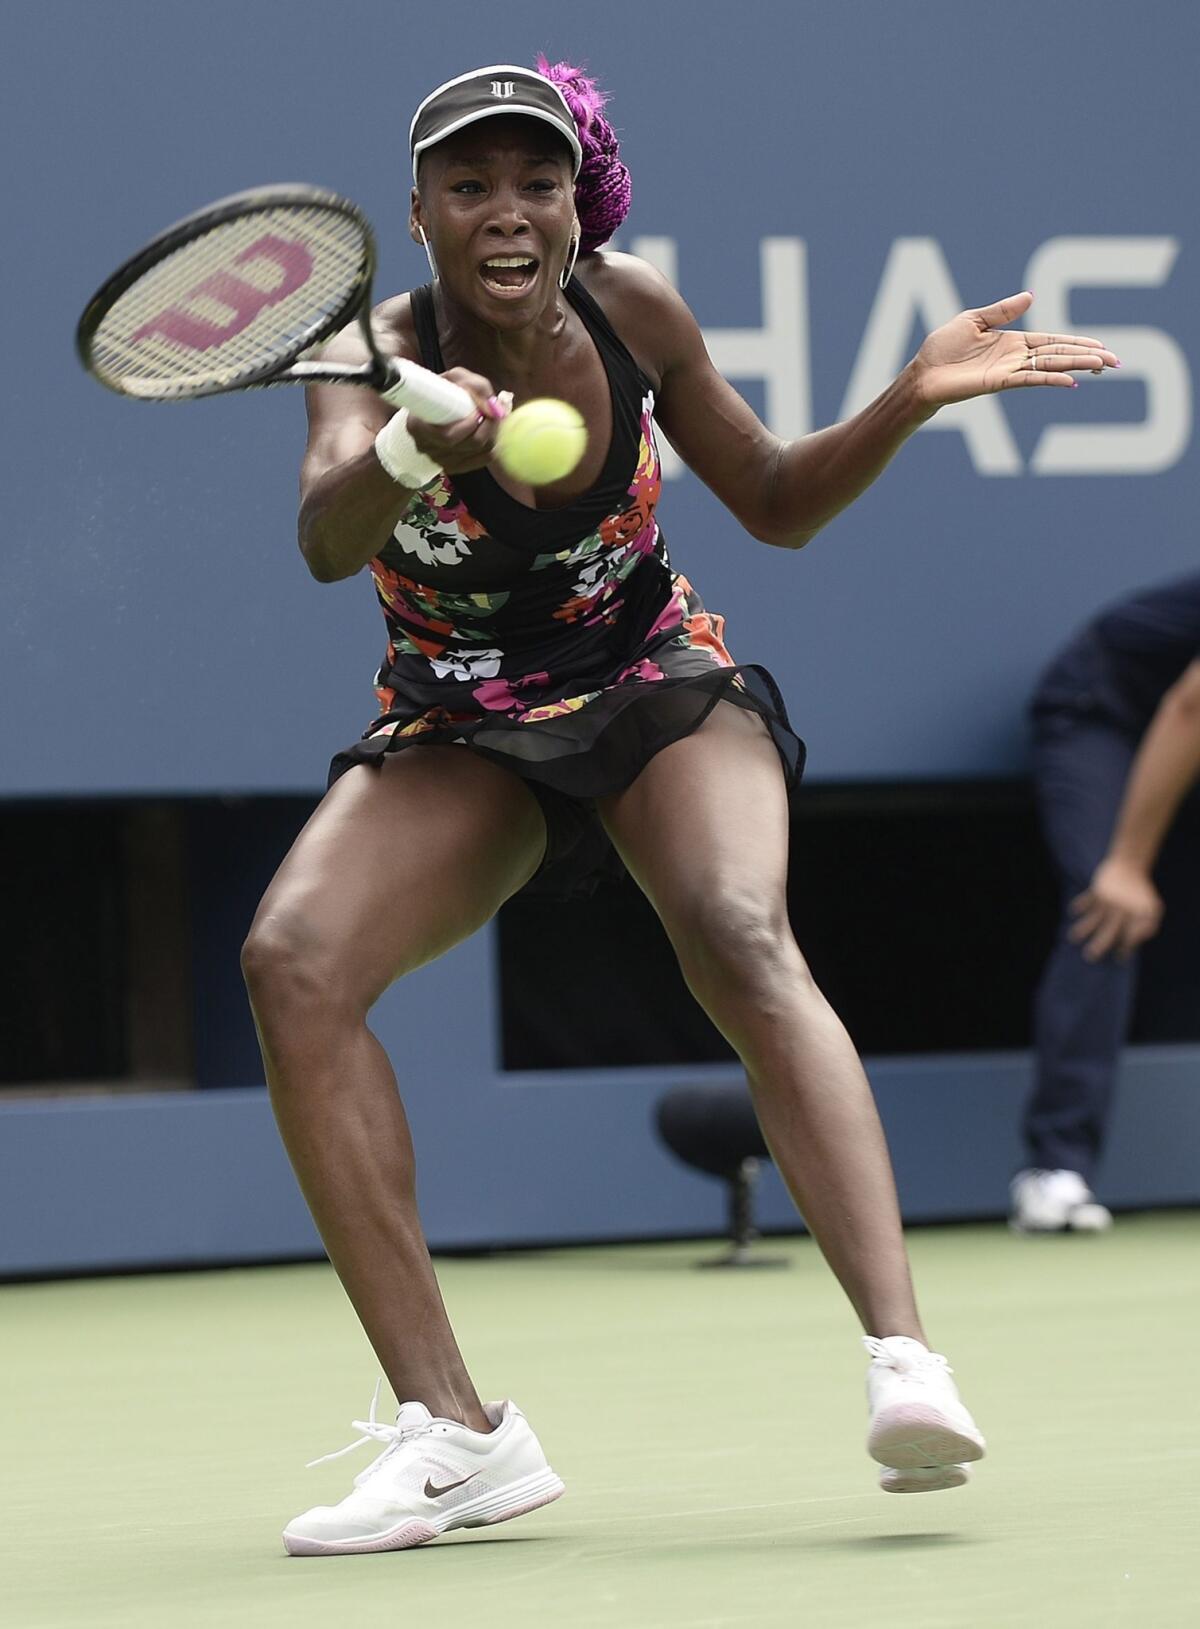 Venus Williams returns a shot during her first-round victory over Kirsten Flipkens at the U.S. Open on Monday.